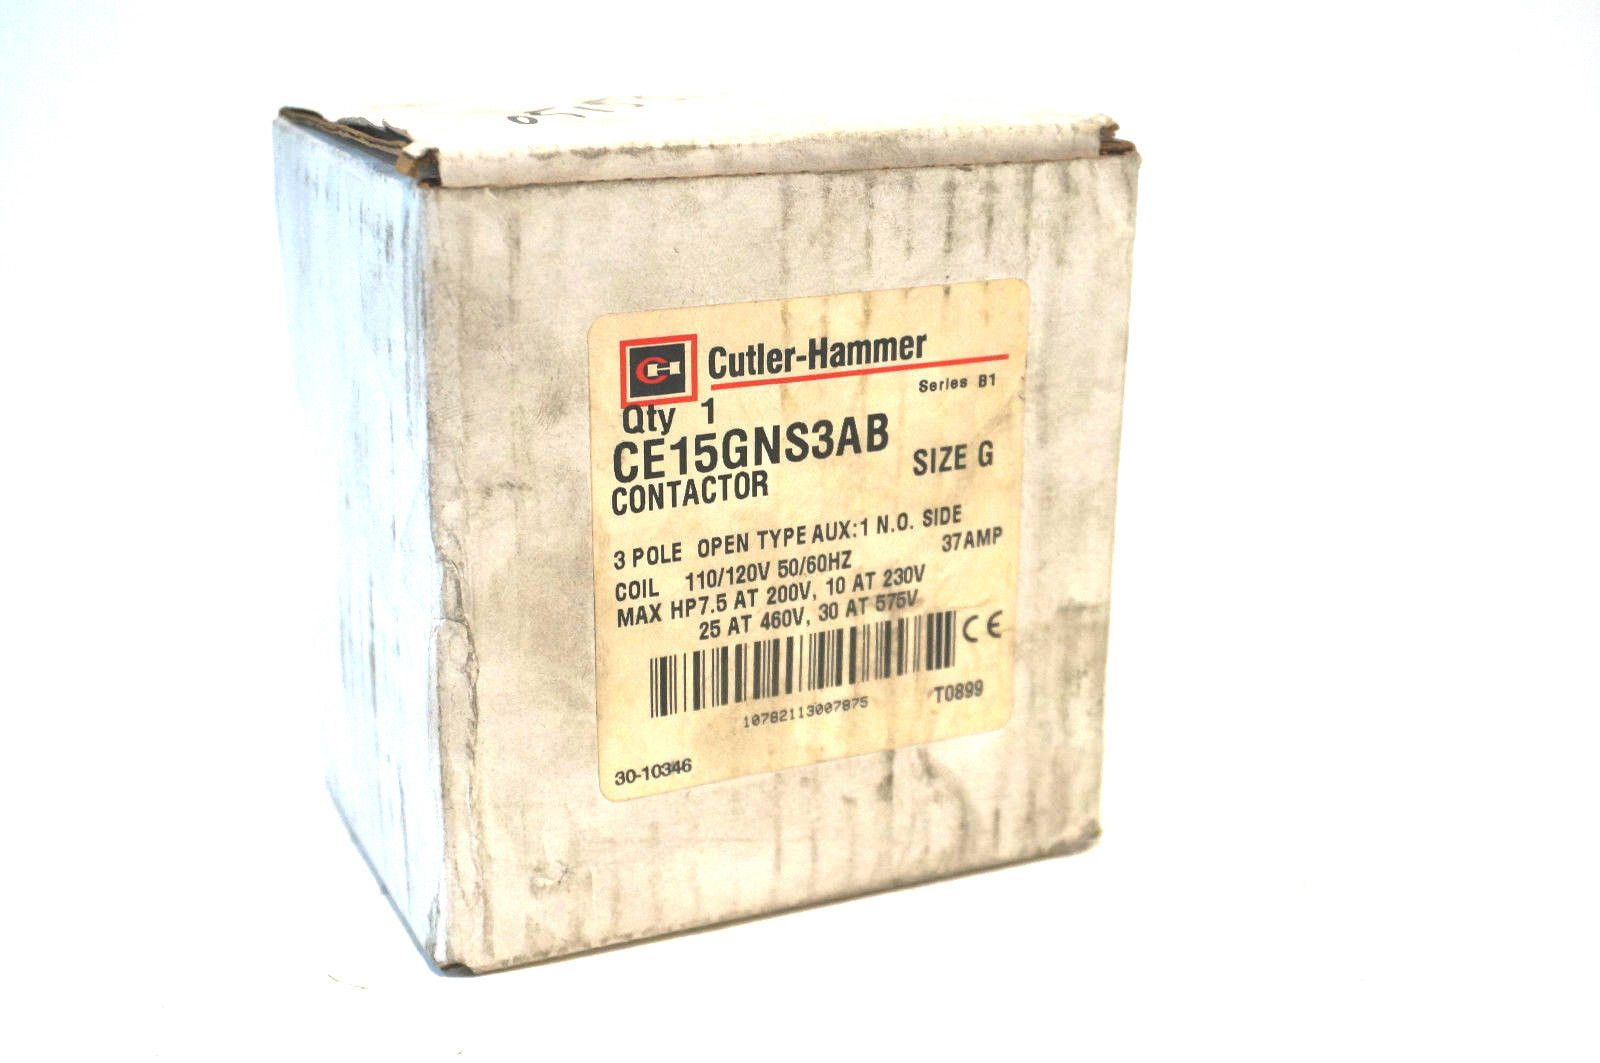 Cutler-Hammer CE15GNS3AB Contactor size G 3 Pole Open Type 